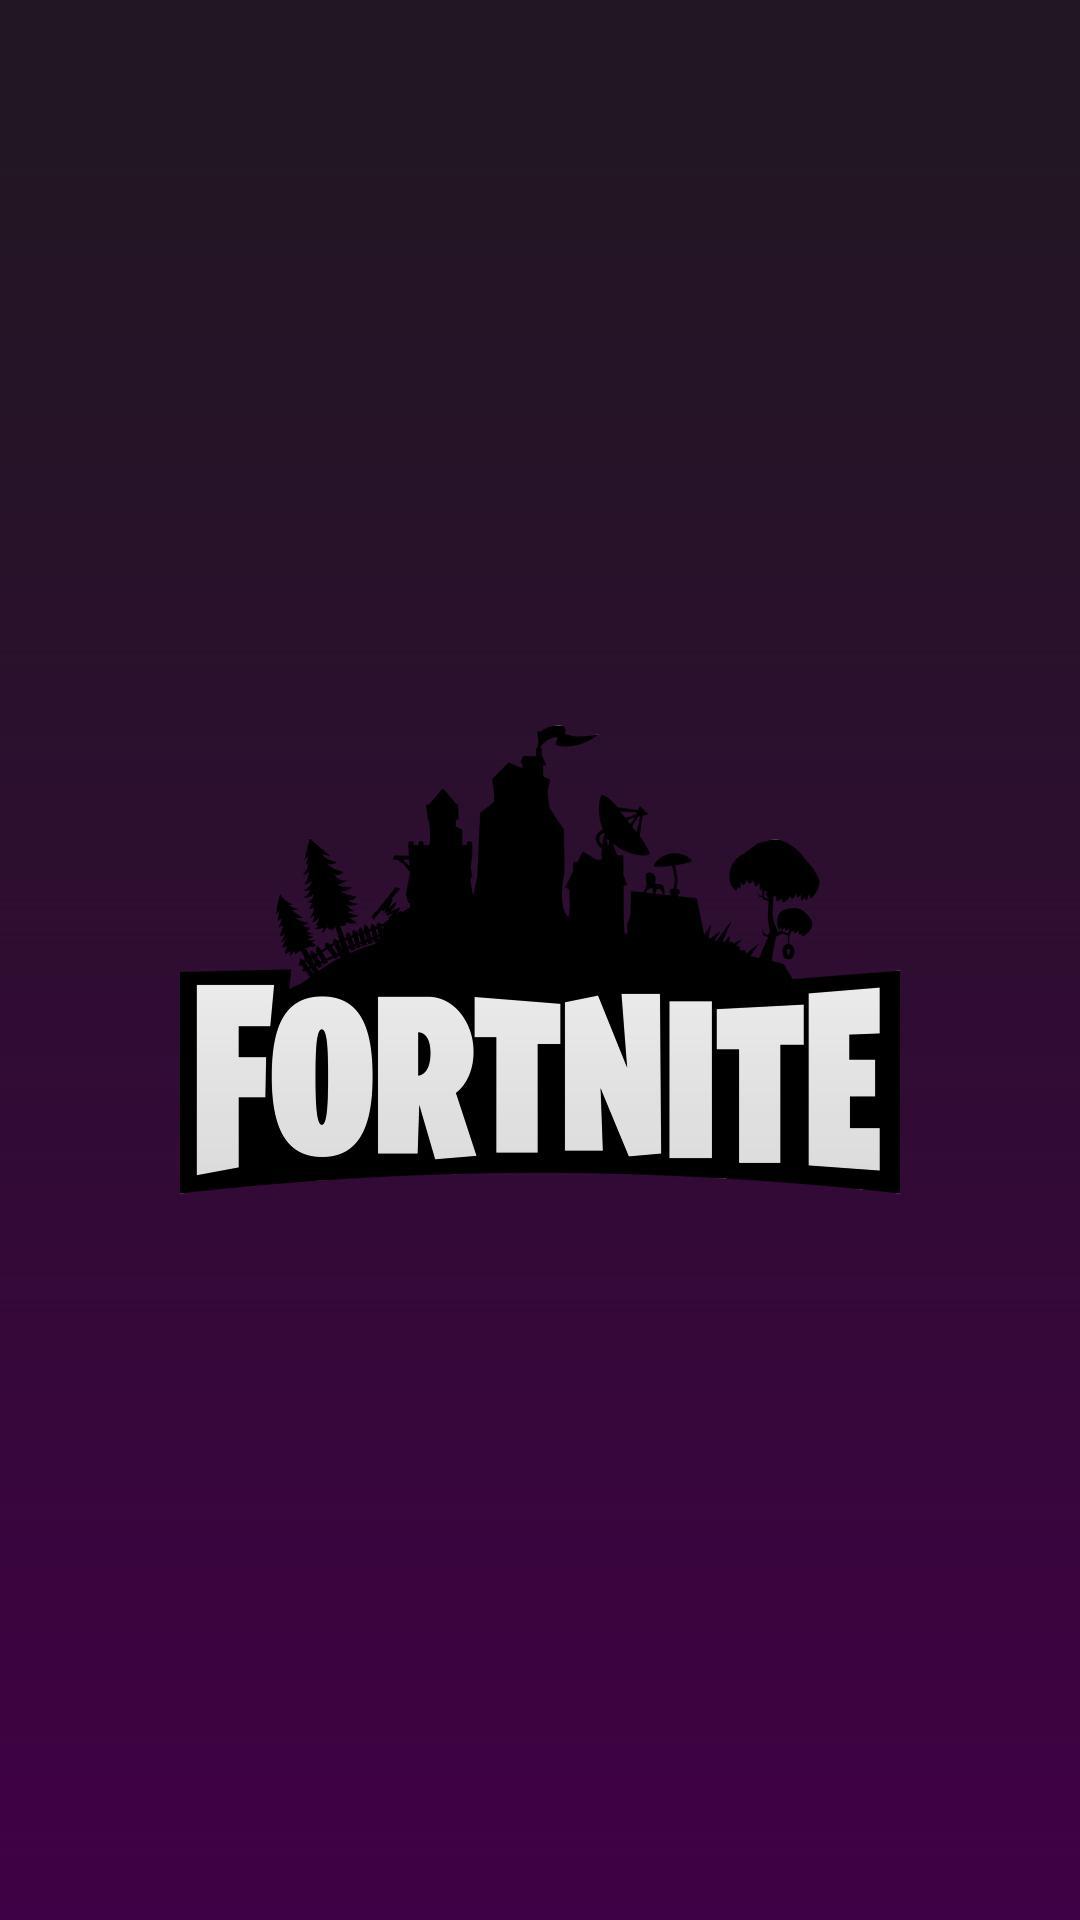 Fortnite Mobile Wallpaper. iPhone and Android Fortnite Wallpaper HD